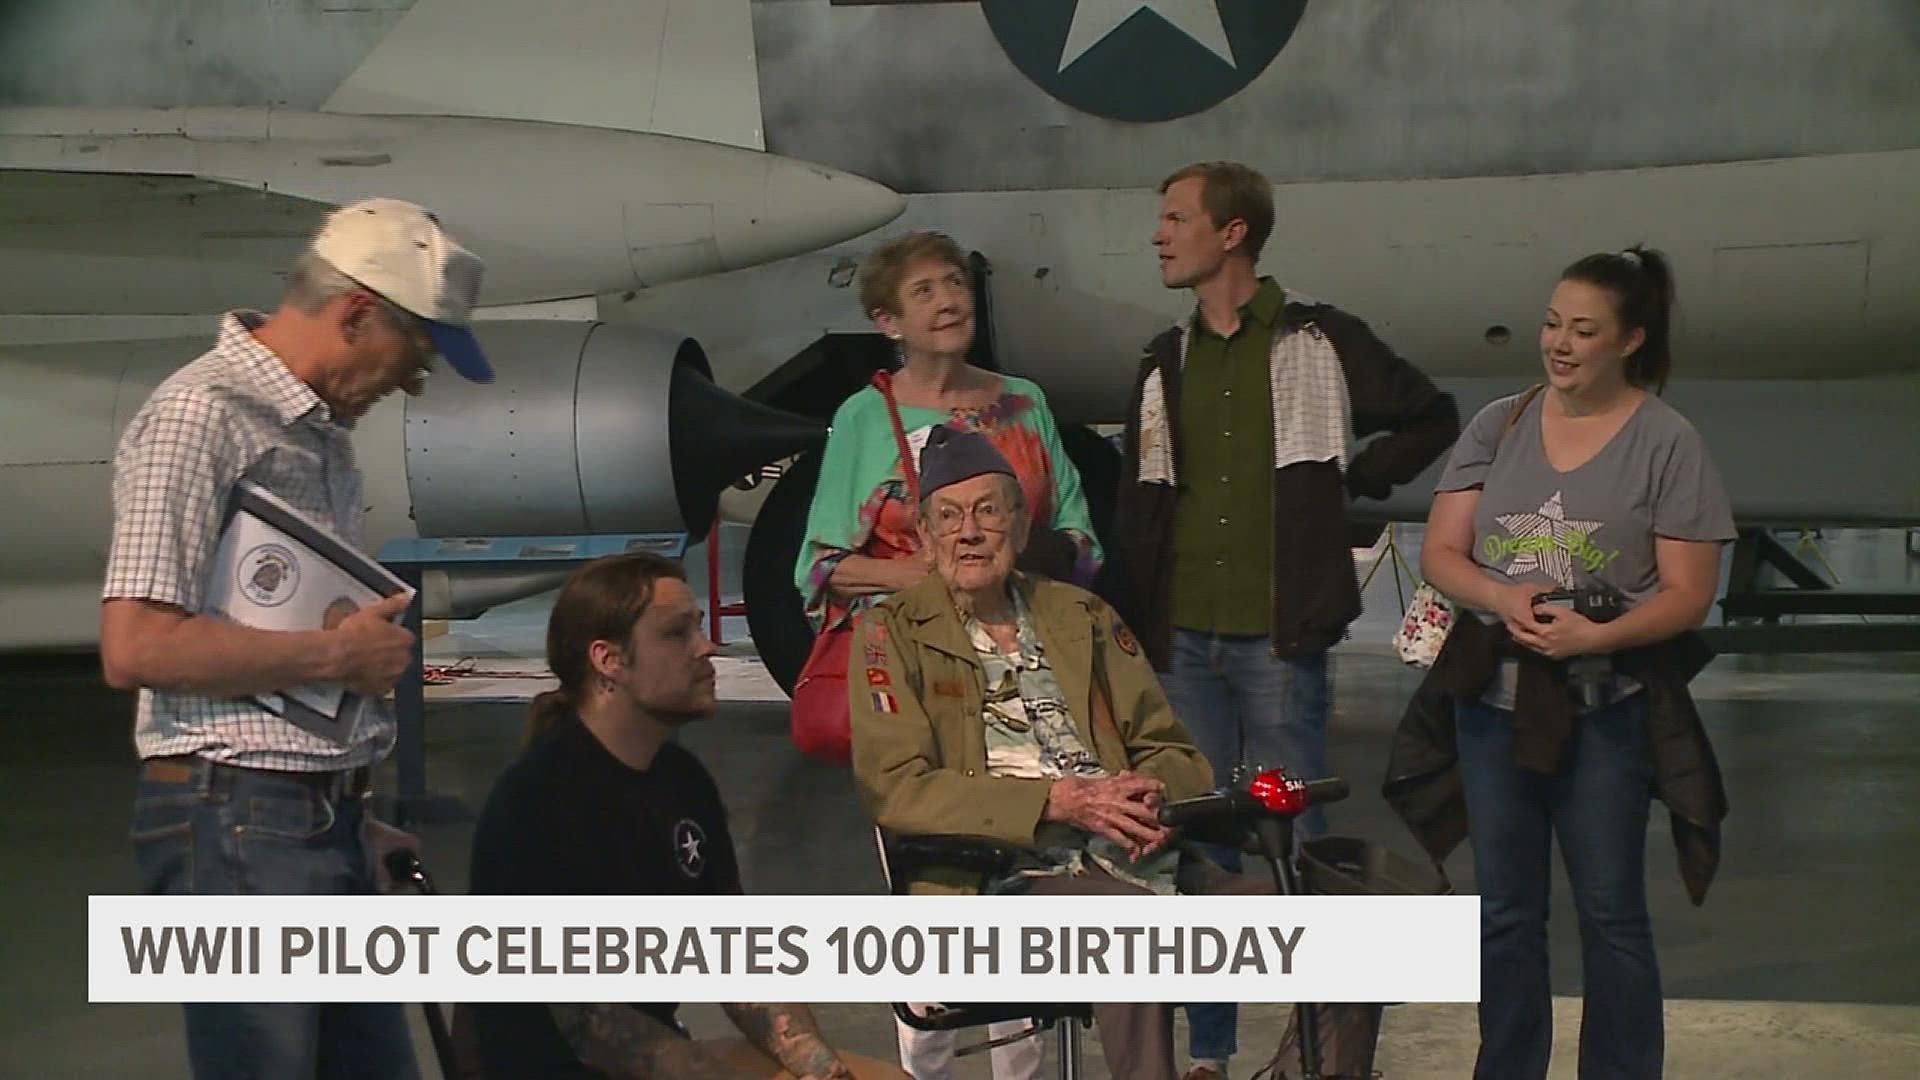 A Nebraska vet who flew a bomber during World War 2 got to celebrate his centennial birthday and honor D-Day by getting a chance to fly one more time.